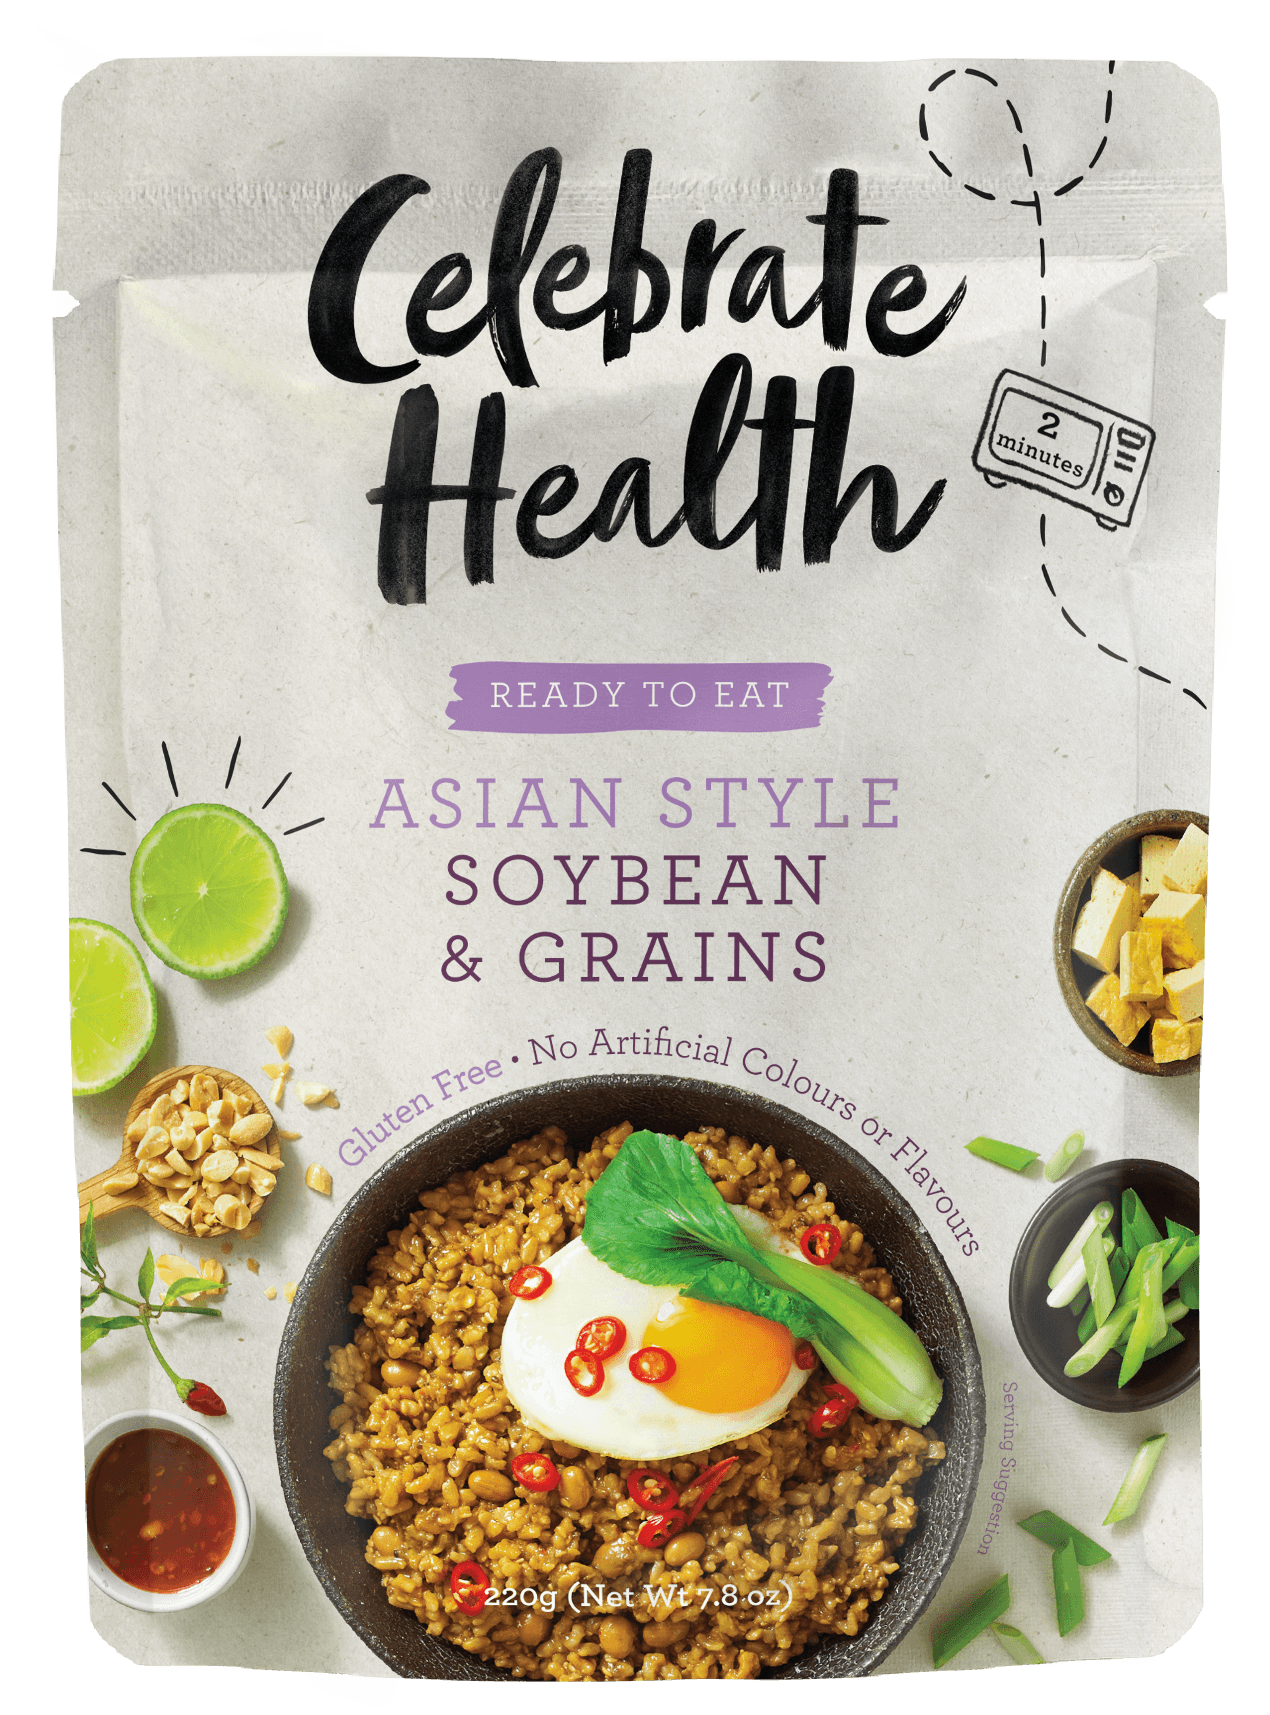 Celebrate Health Ready to Eat Asian Style Soybean & Grains Image